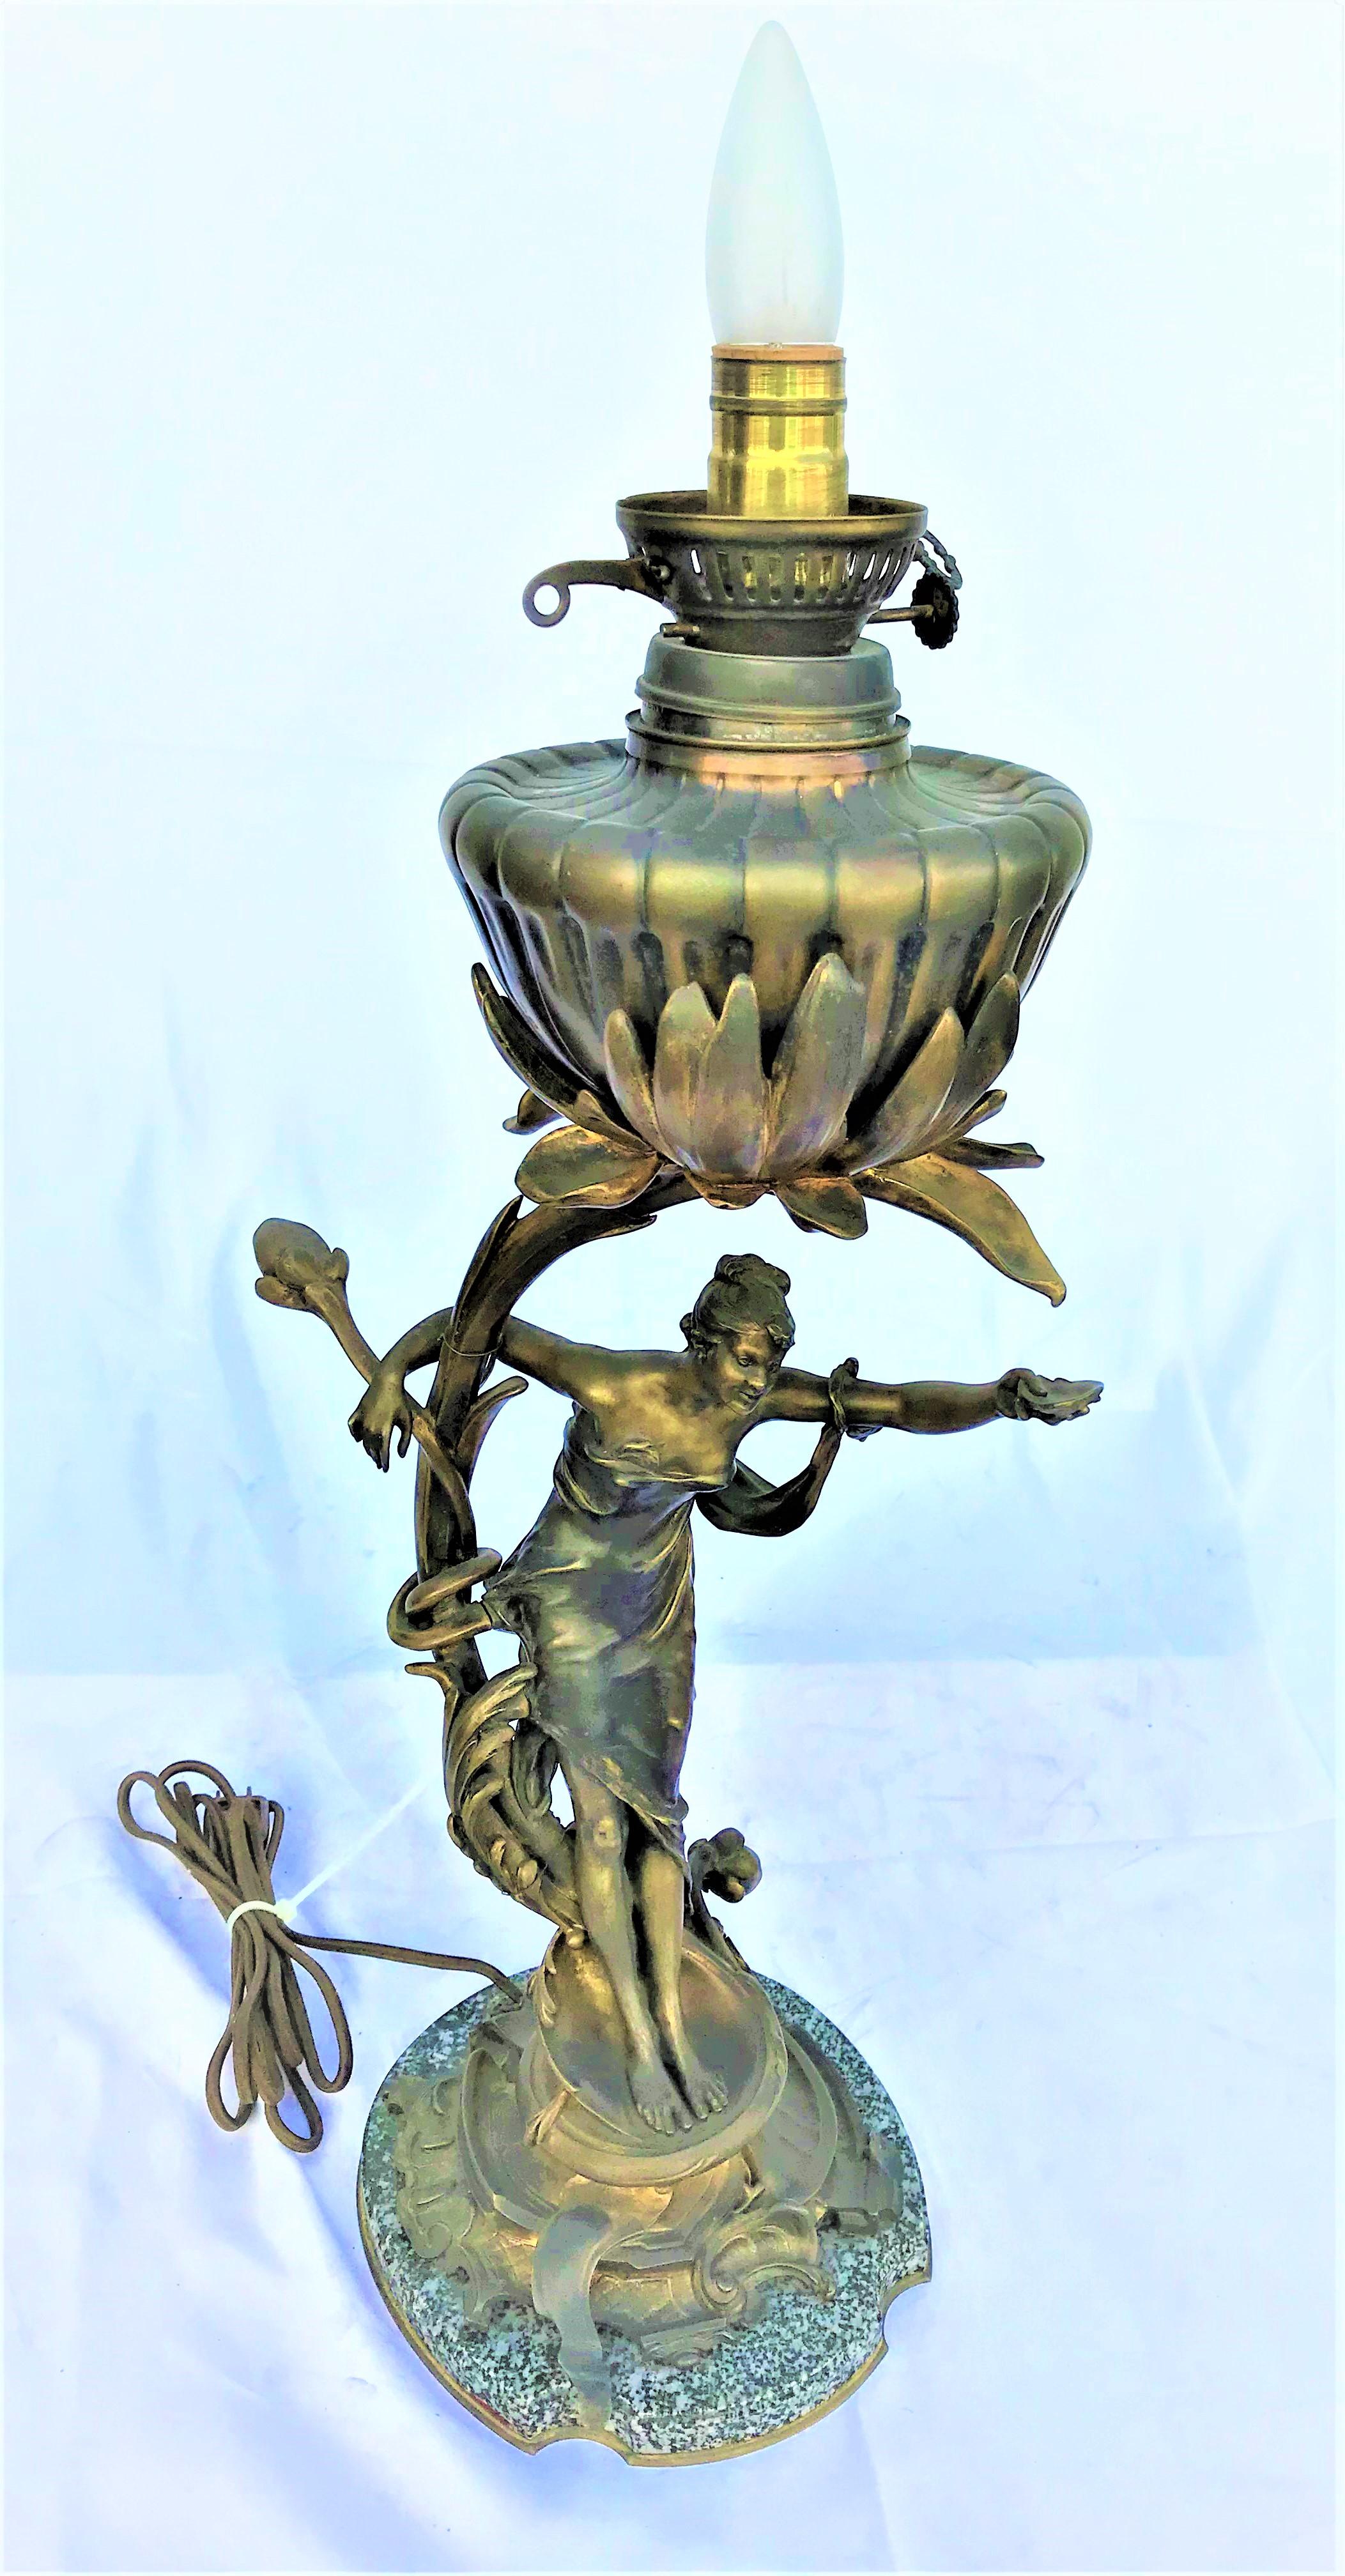 An Art Nouveau lamp in bronze circa 1890,s. Was an original oil lamp that was converted long ago to electric. A very good job. Shade and hurricane are newer glass. Large 31 1/2